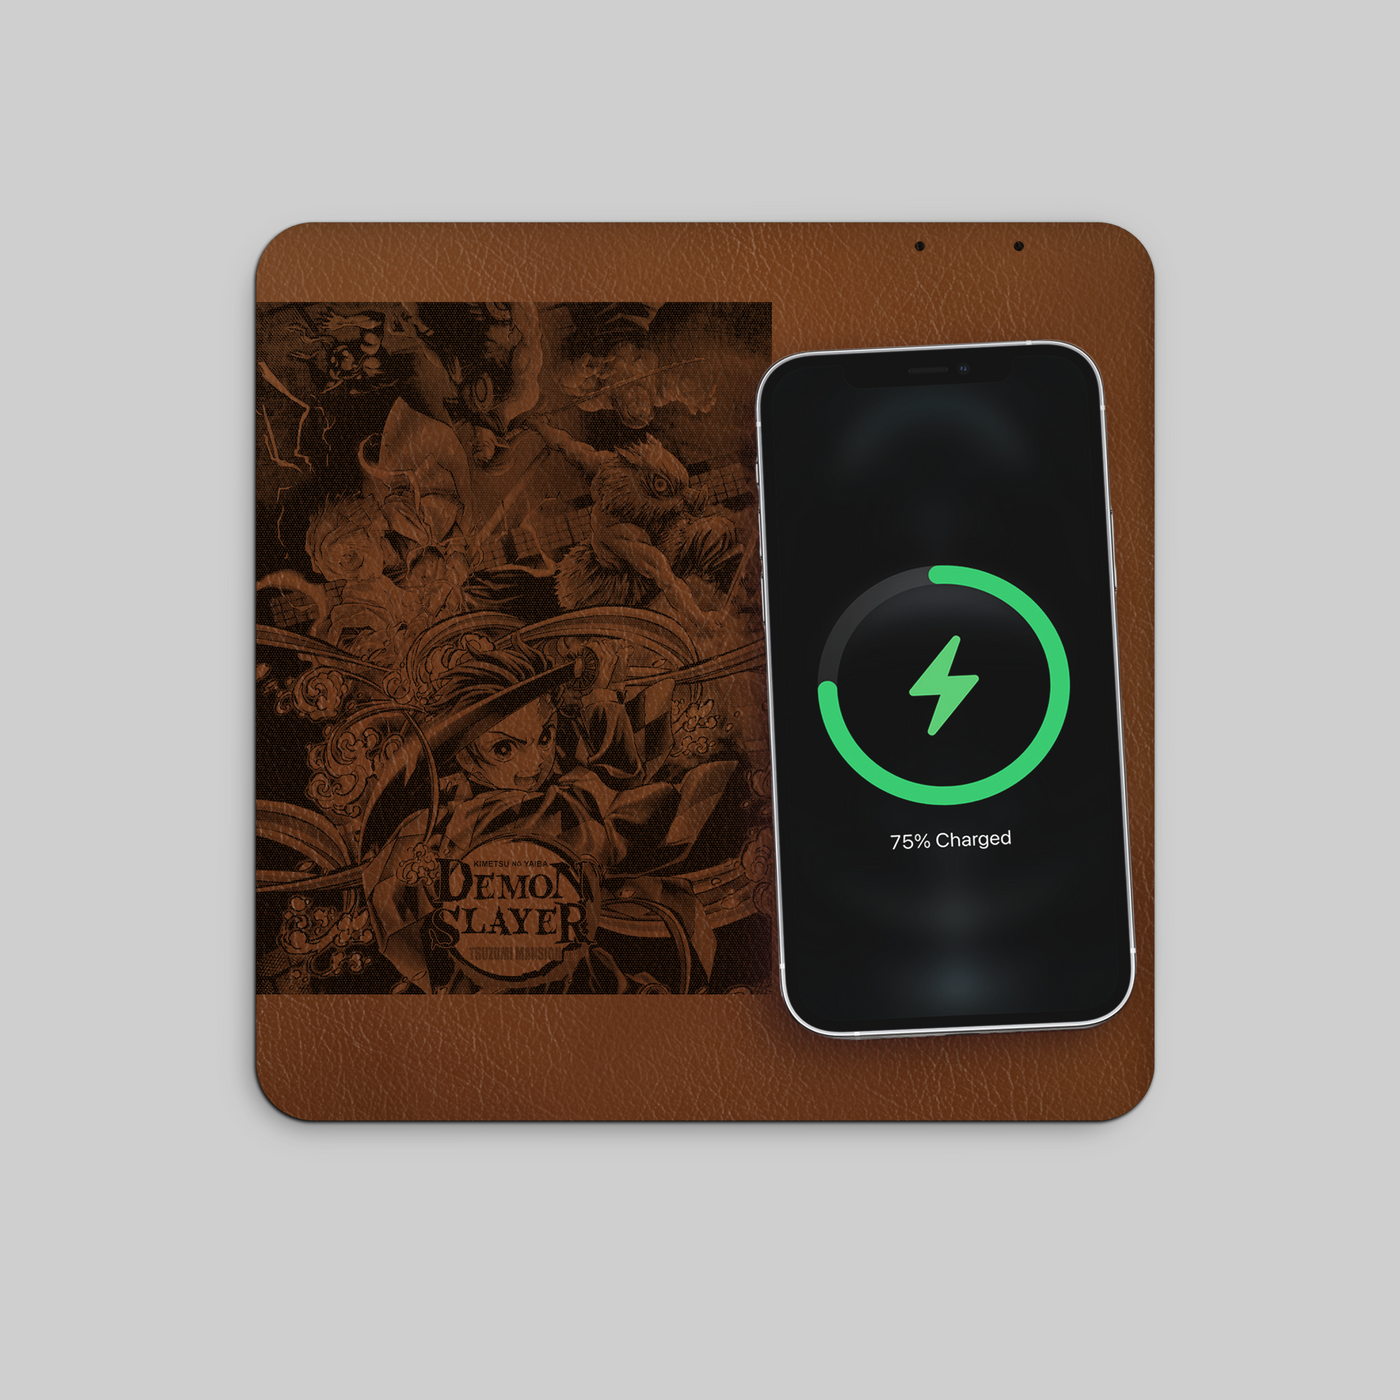 Wireless Charger with Clocks  Promotional Gifts Customised Gifts  Uniforms Luxury Gifts Carton Works  Boxes  Wooden Works Exhibition  Events Constructions